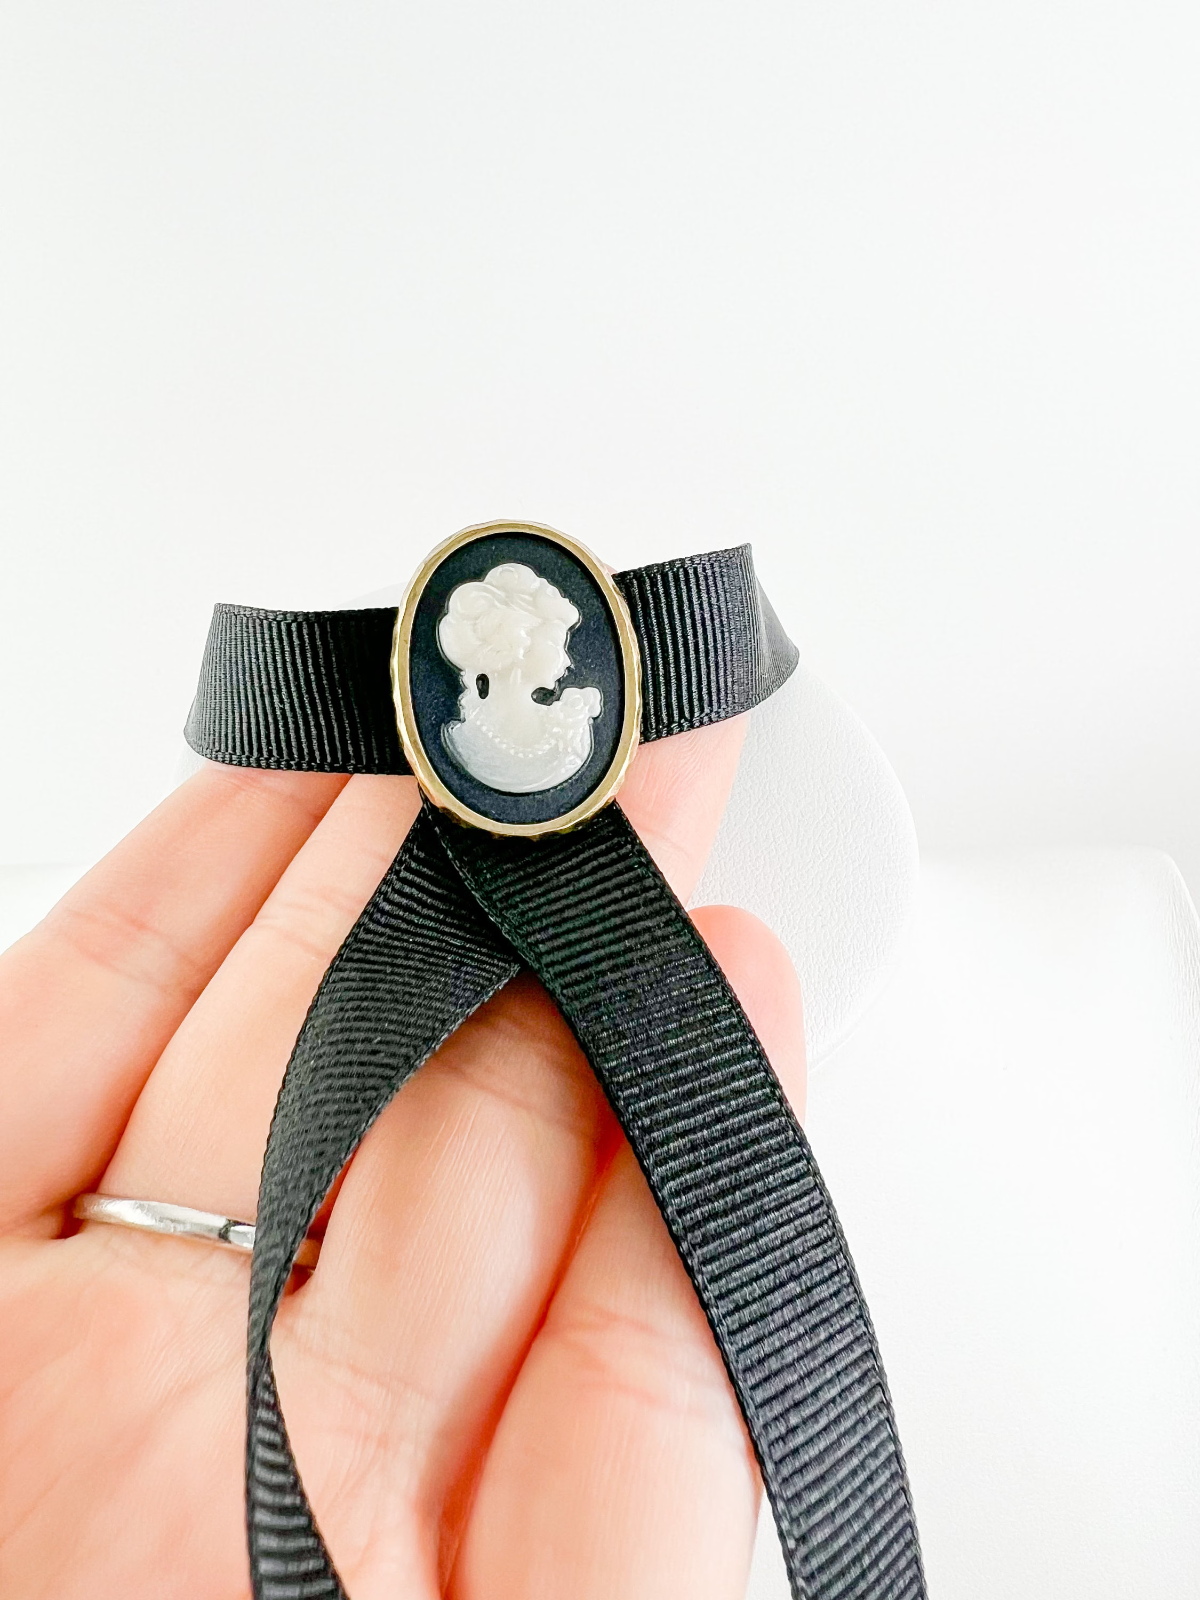 Vintage Christian Dior Choker Black Tone,  Dior Cameo Necklace, Necklace ribbon Bow, Gift for her, Best Friend Gift, Modern Bridal Necklace